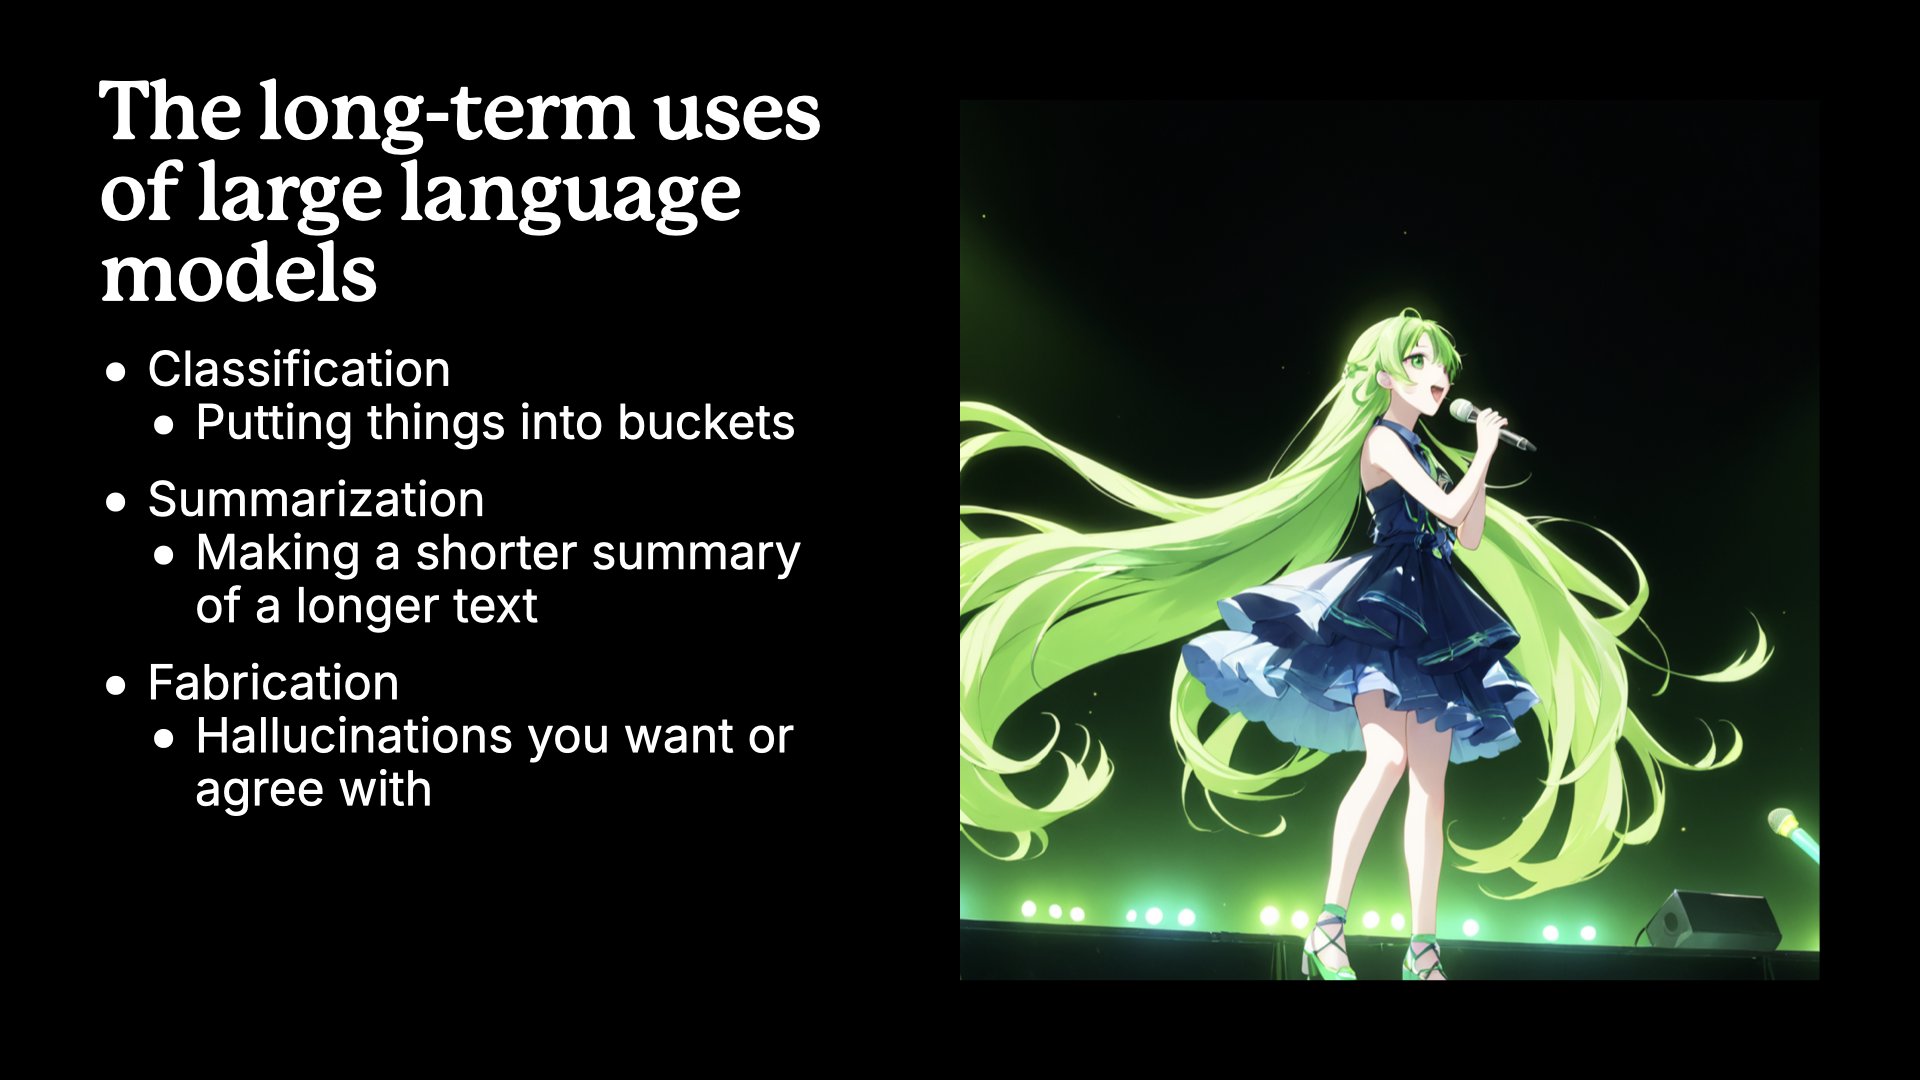 A slide showing the future uses of large language models with a green-haired anime idol on the other side signing to a crowd of fans with waving glowstick/microphones.